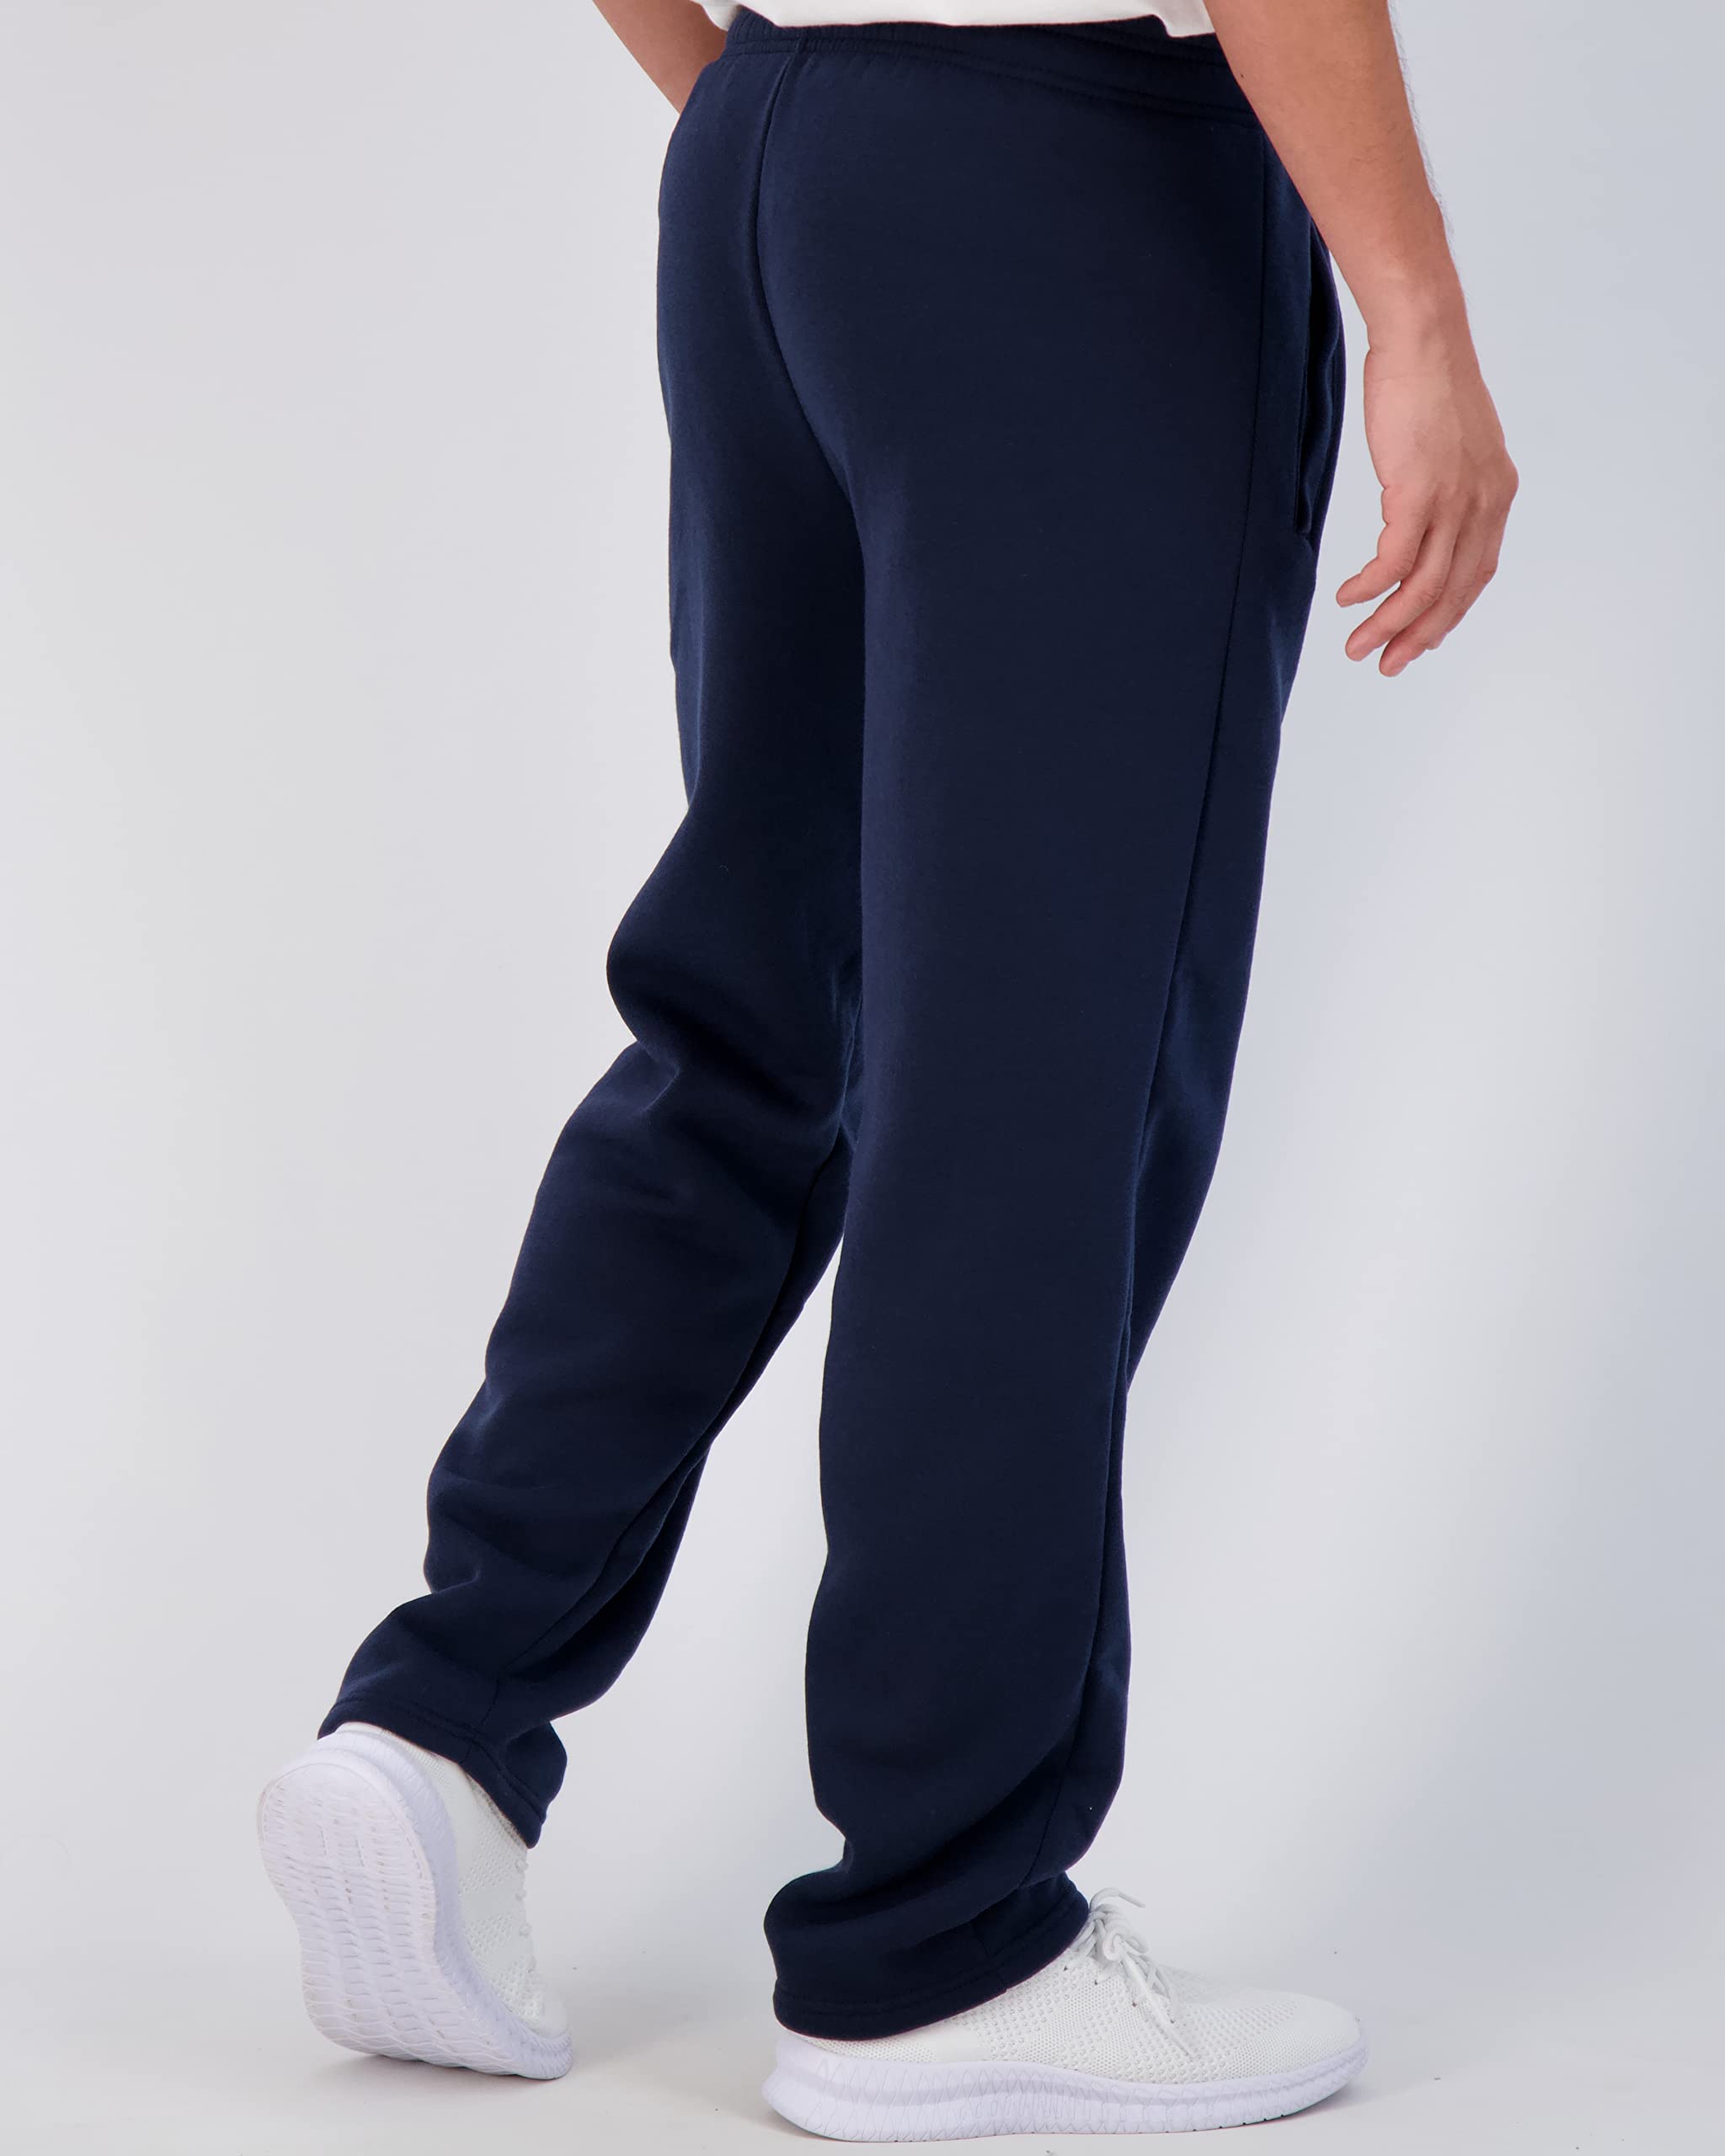 Real Essentials 3 Pack: Men's Tech Fleece Active Athletic Casual Open Bottom Sweatpants with Pockets